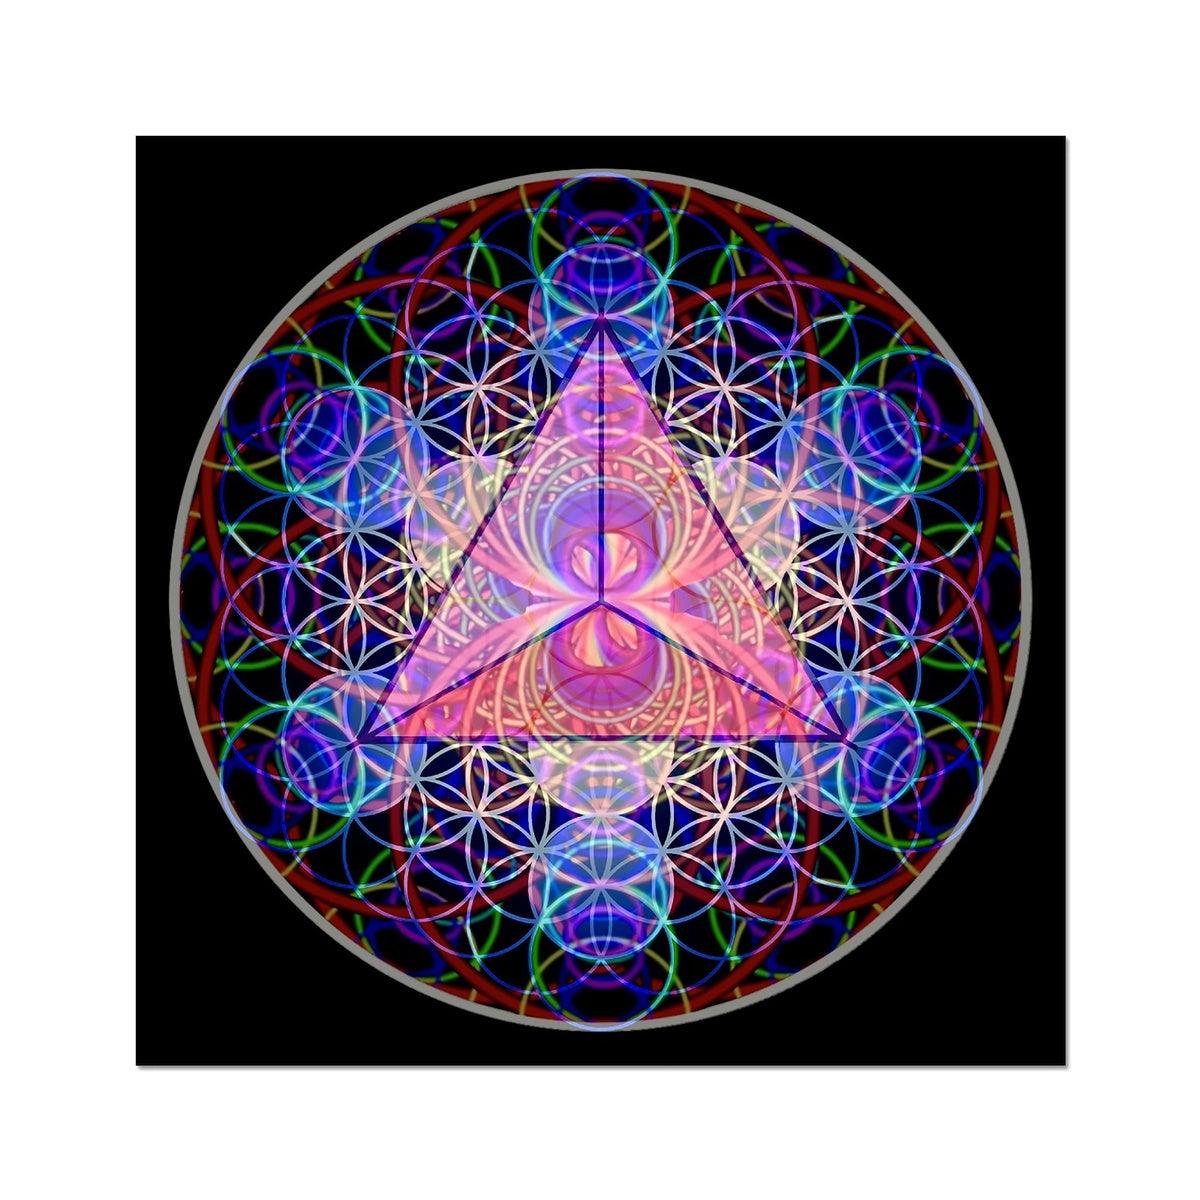 The Platonic Solid Tetrahedron with the inverted sound waves Fine Art Print